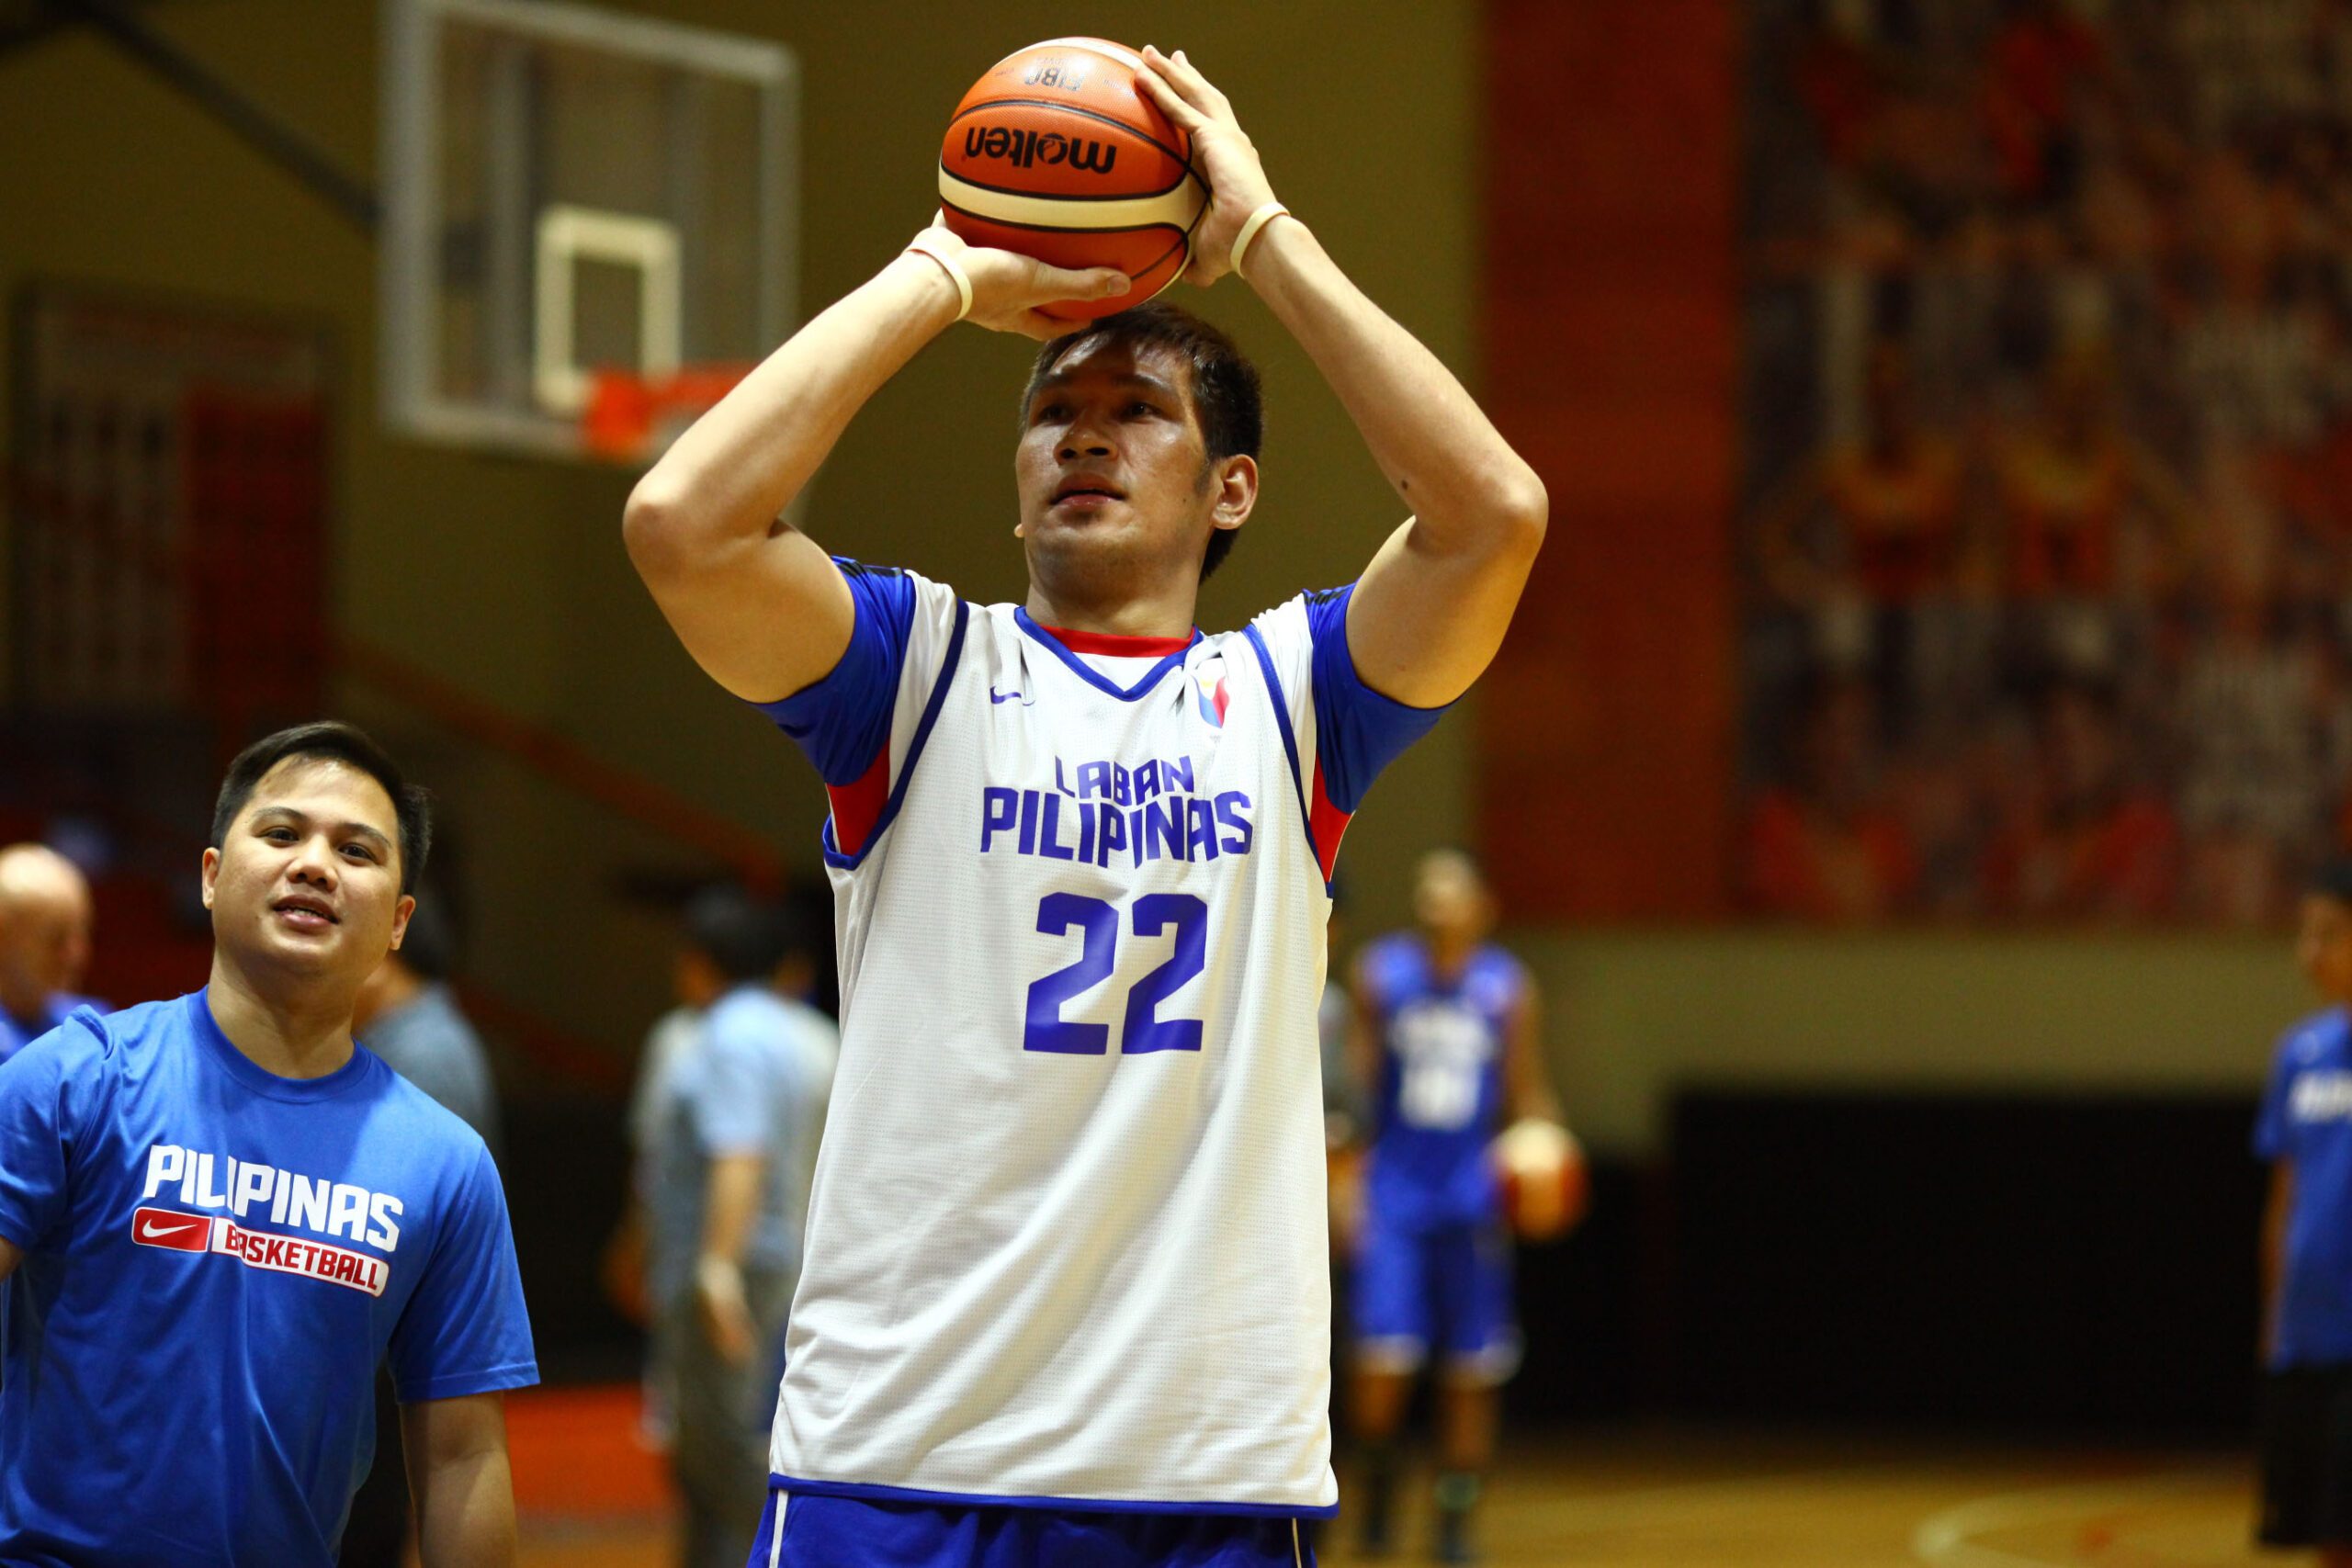 June Mar Fajardo being courted by CBA team – source